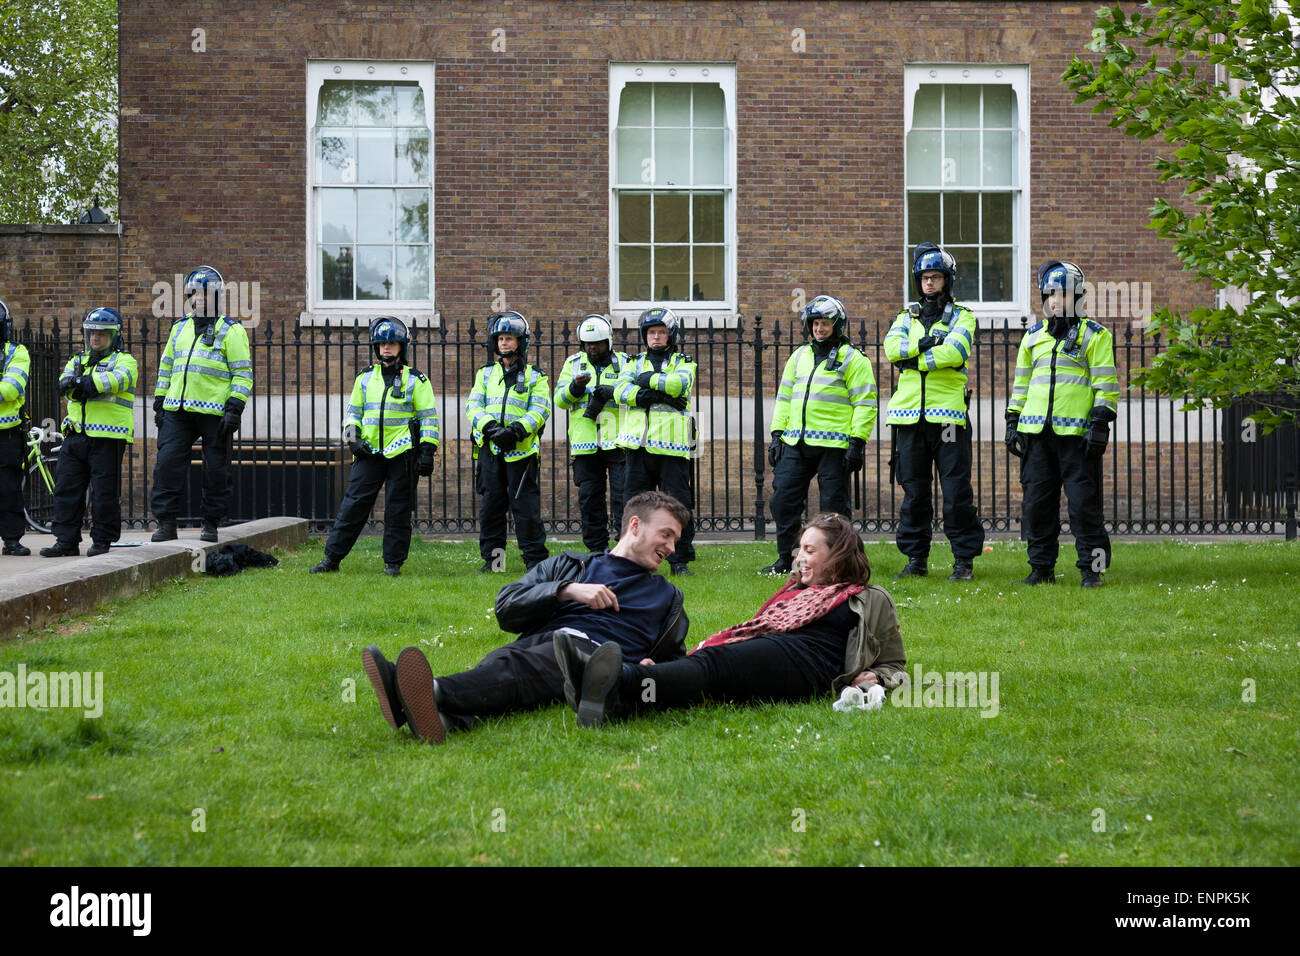 London, UK. 9th May, 2015. Demonstrators on Whitehall relax during an anti-Tory protest in central London two days after the UK general election gave David Cameron's Conservative Party - the Tories - a parliamentary majority. The centre-right Conservative Party are now set to govern the UK for the next five years without the need to form a coalition with any other party. Credit:  David Cliff/Alamy Live News Stock Photo